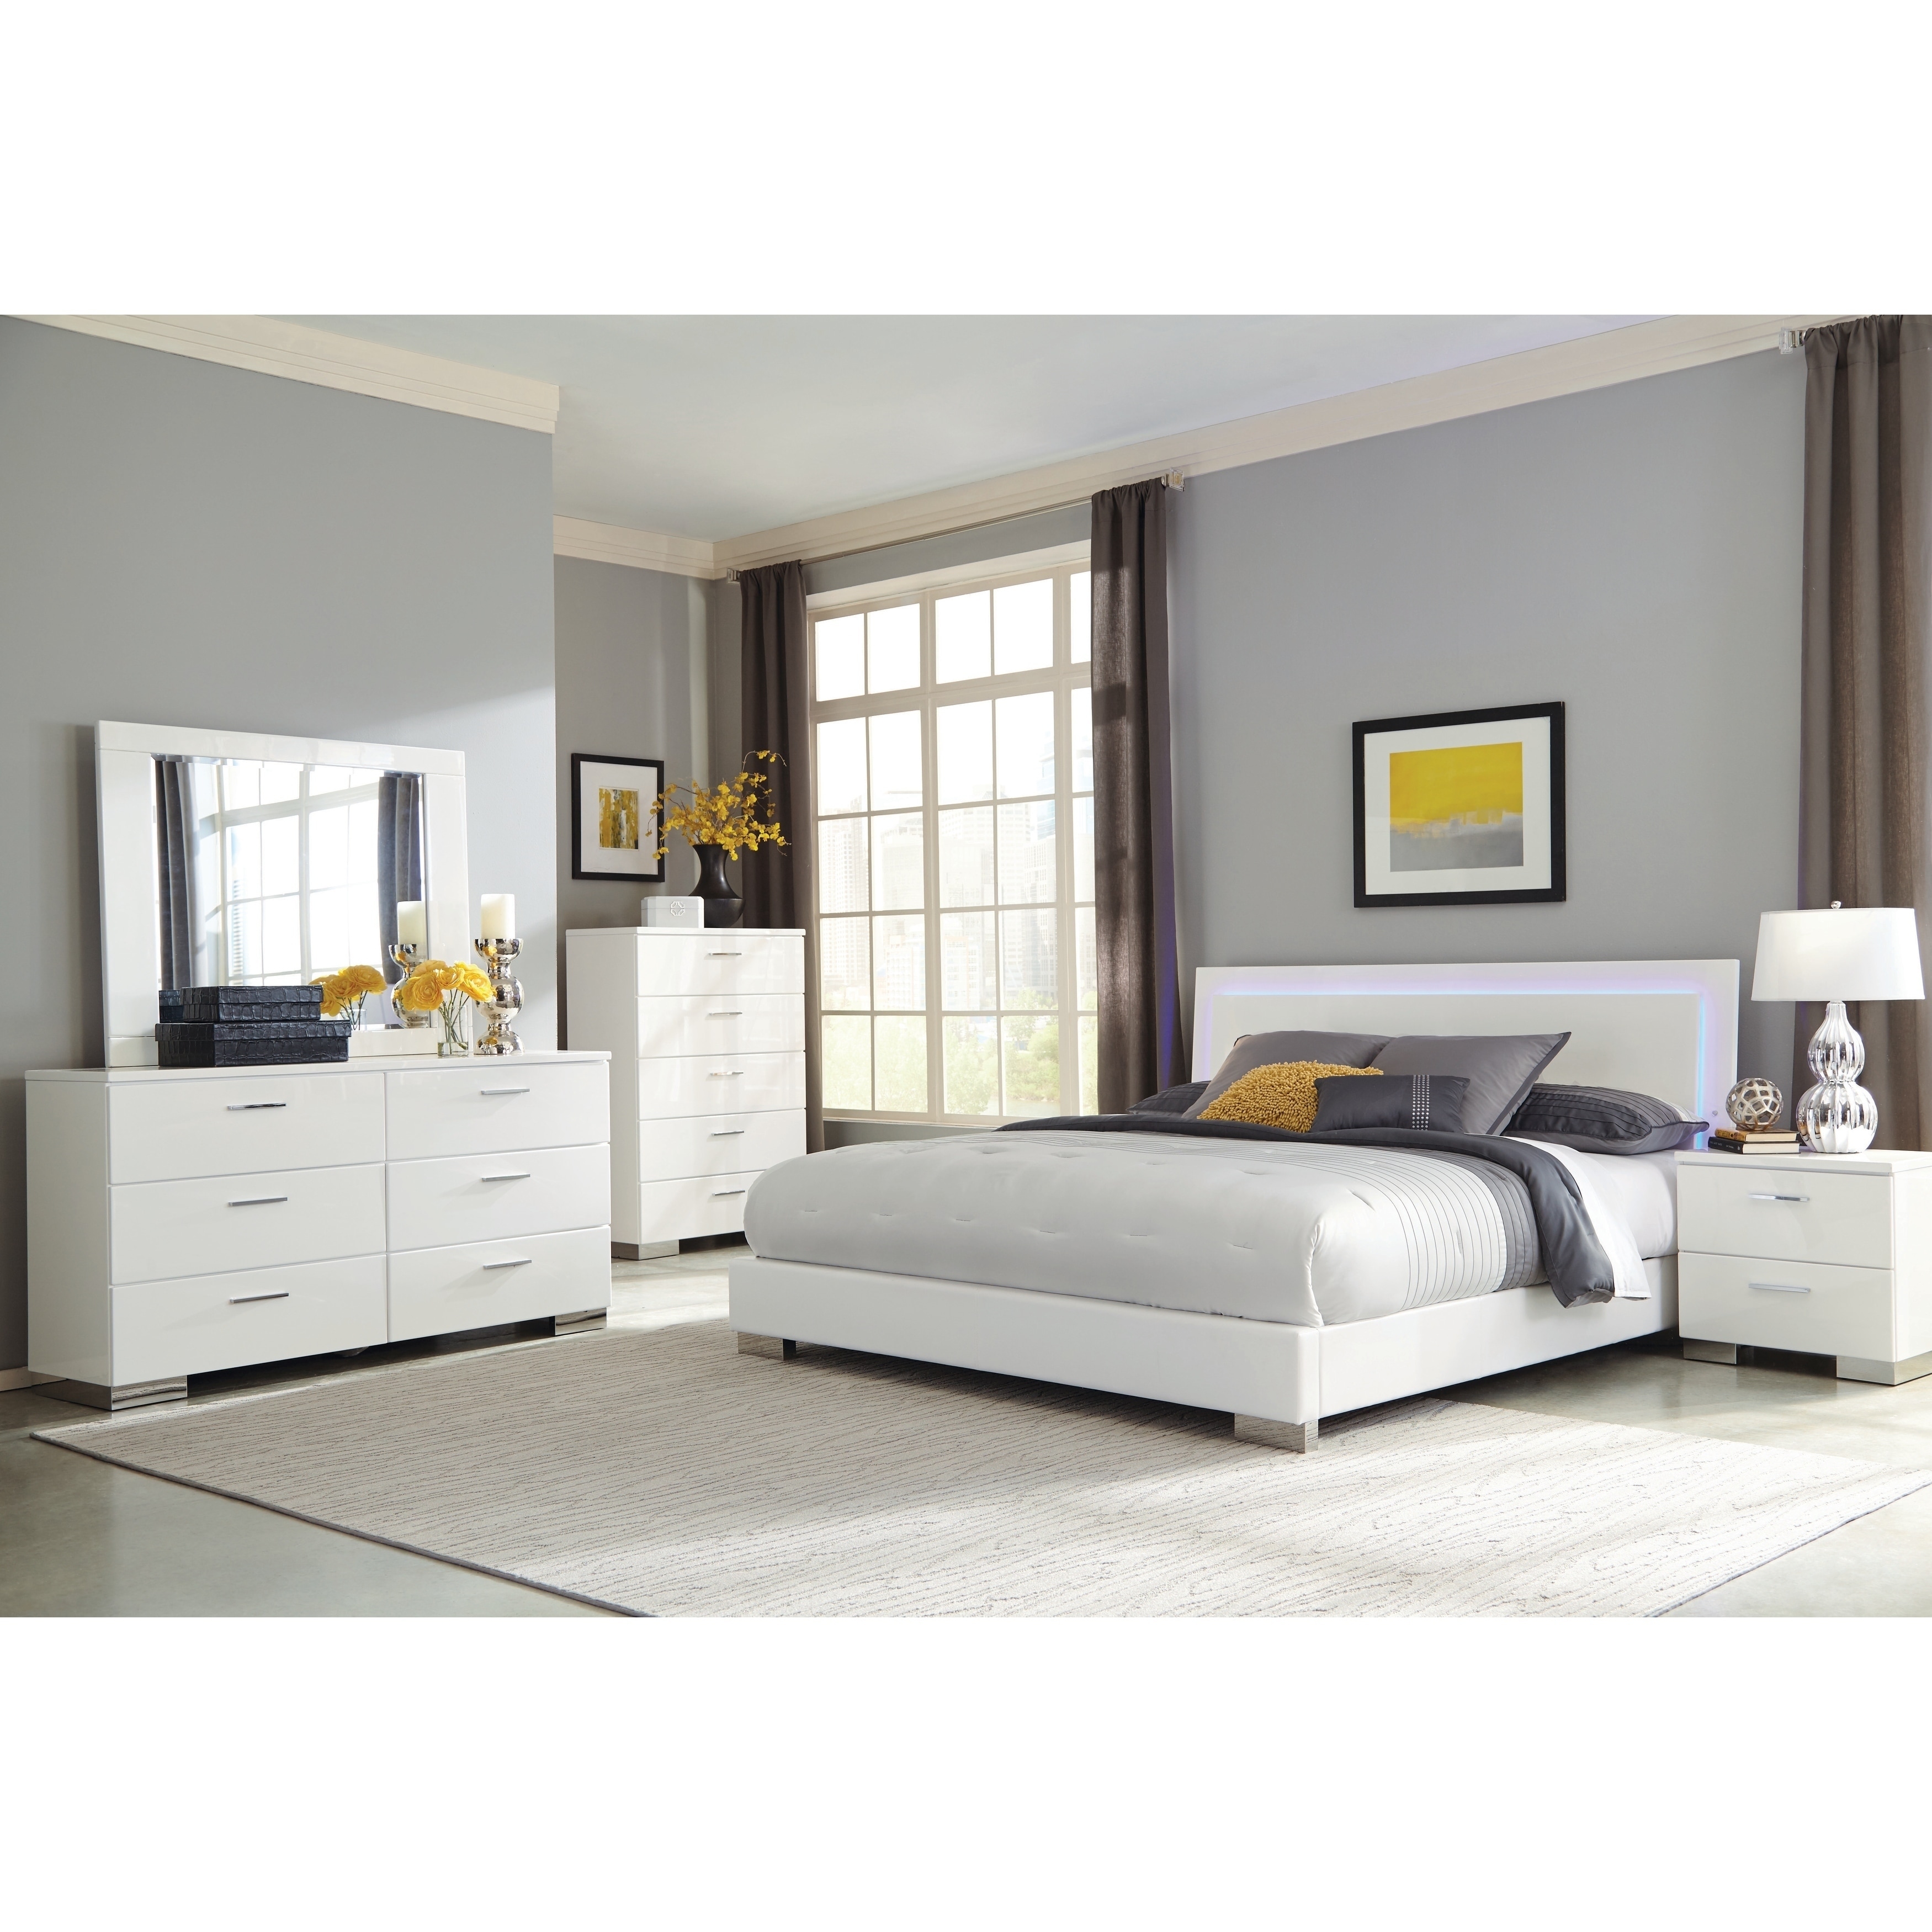 Strick Bolton Alice White 4 Piece Bedroom Set With Led Headboard